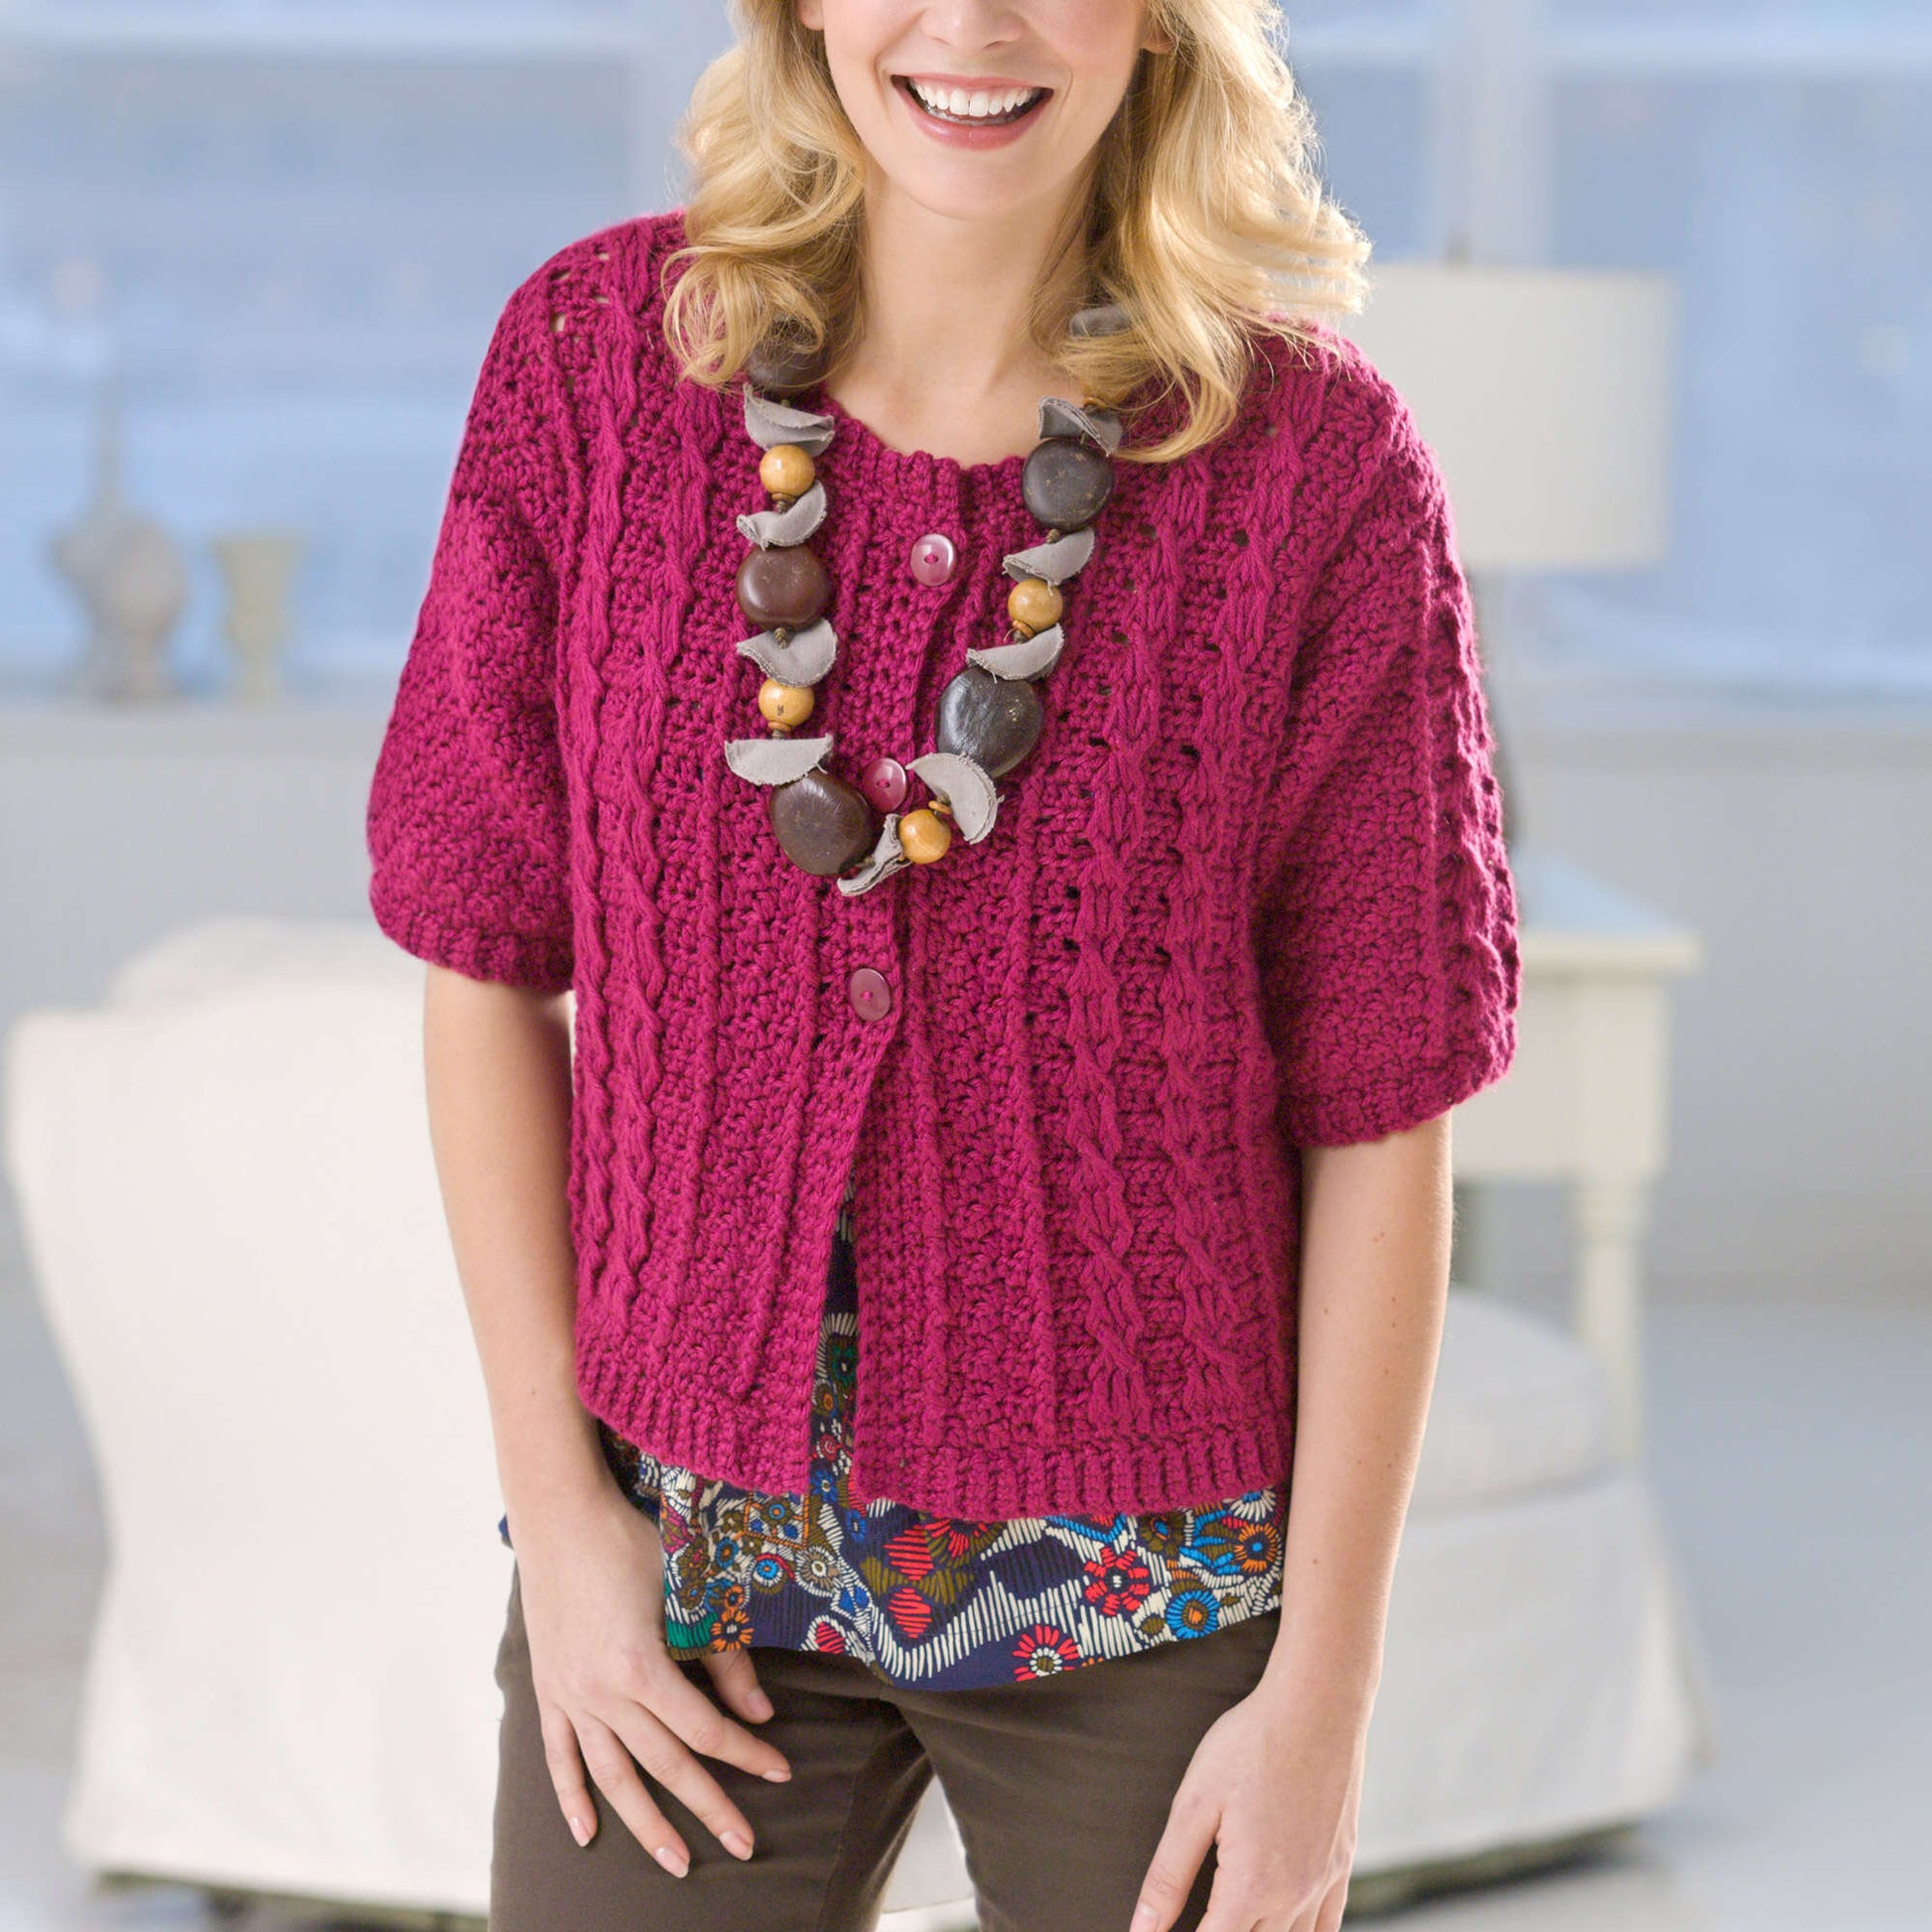 Free Red Heart Crochet Cable Cardi Pattern